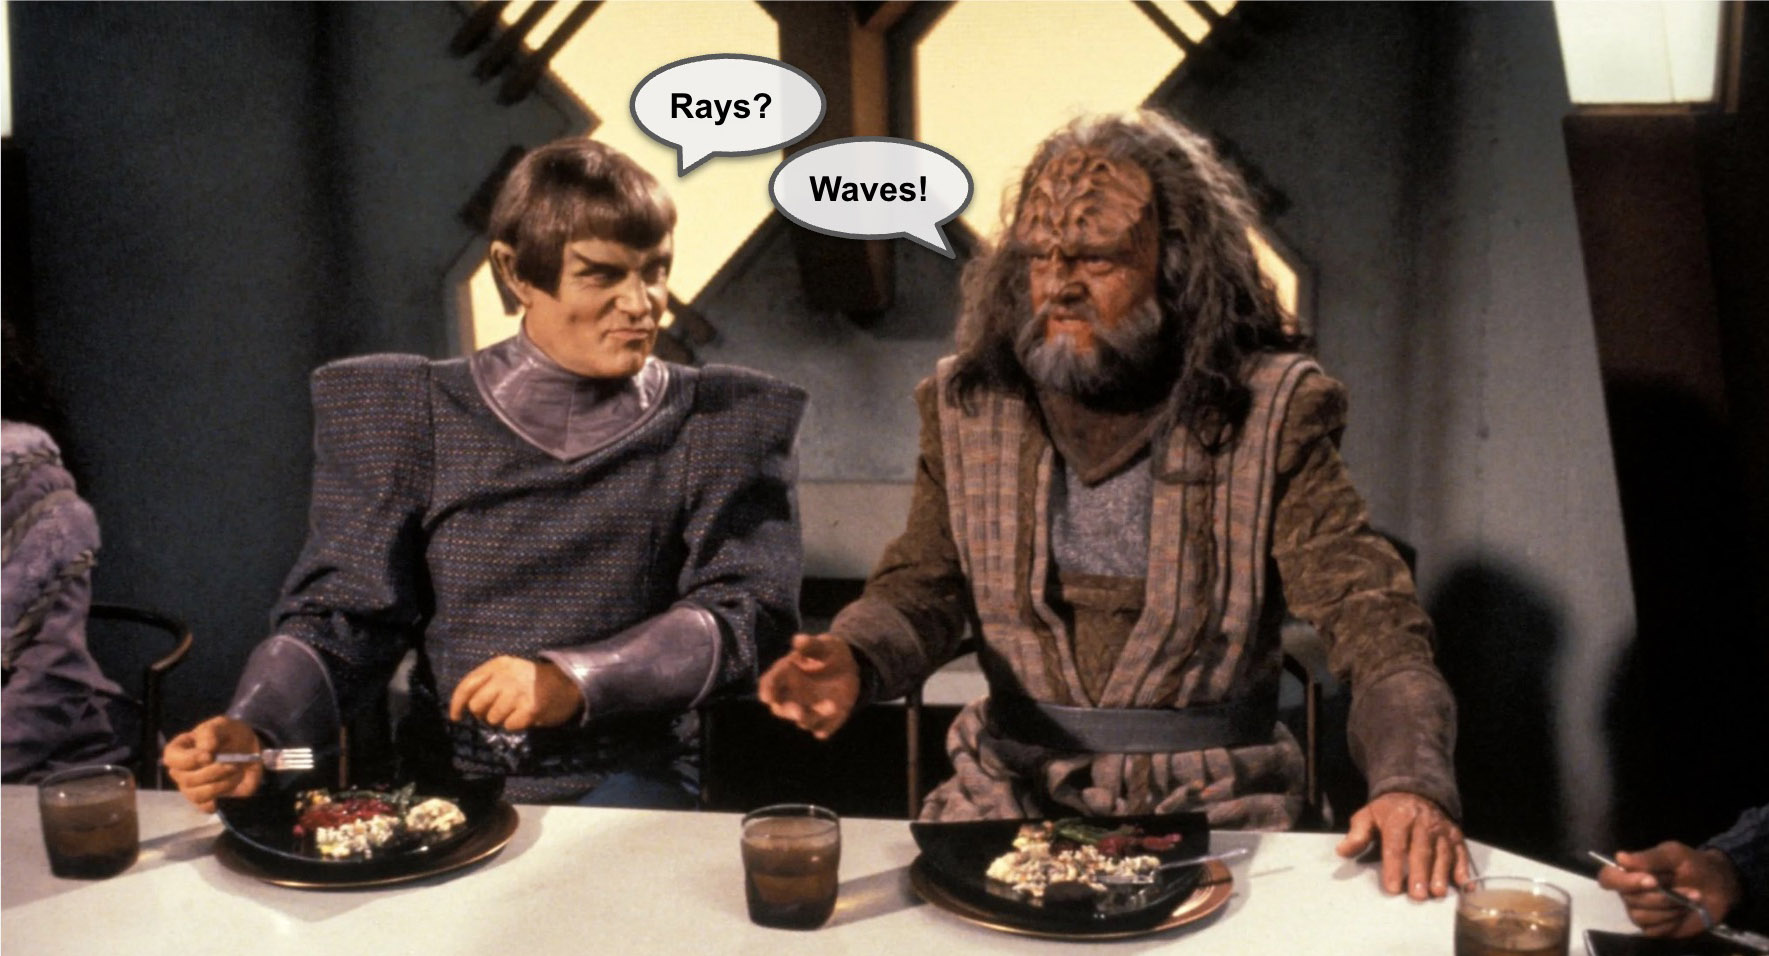 At a dinner table, a Romulan says “Rays?” and a Klingon says “Waves!”